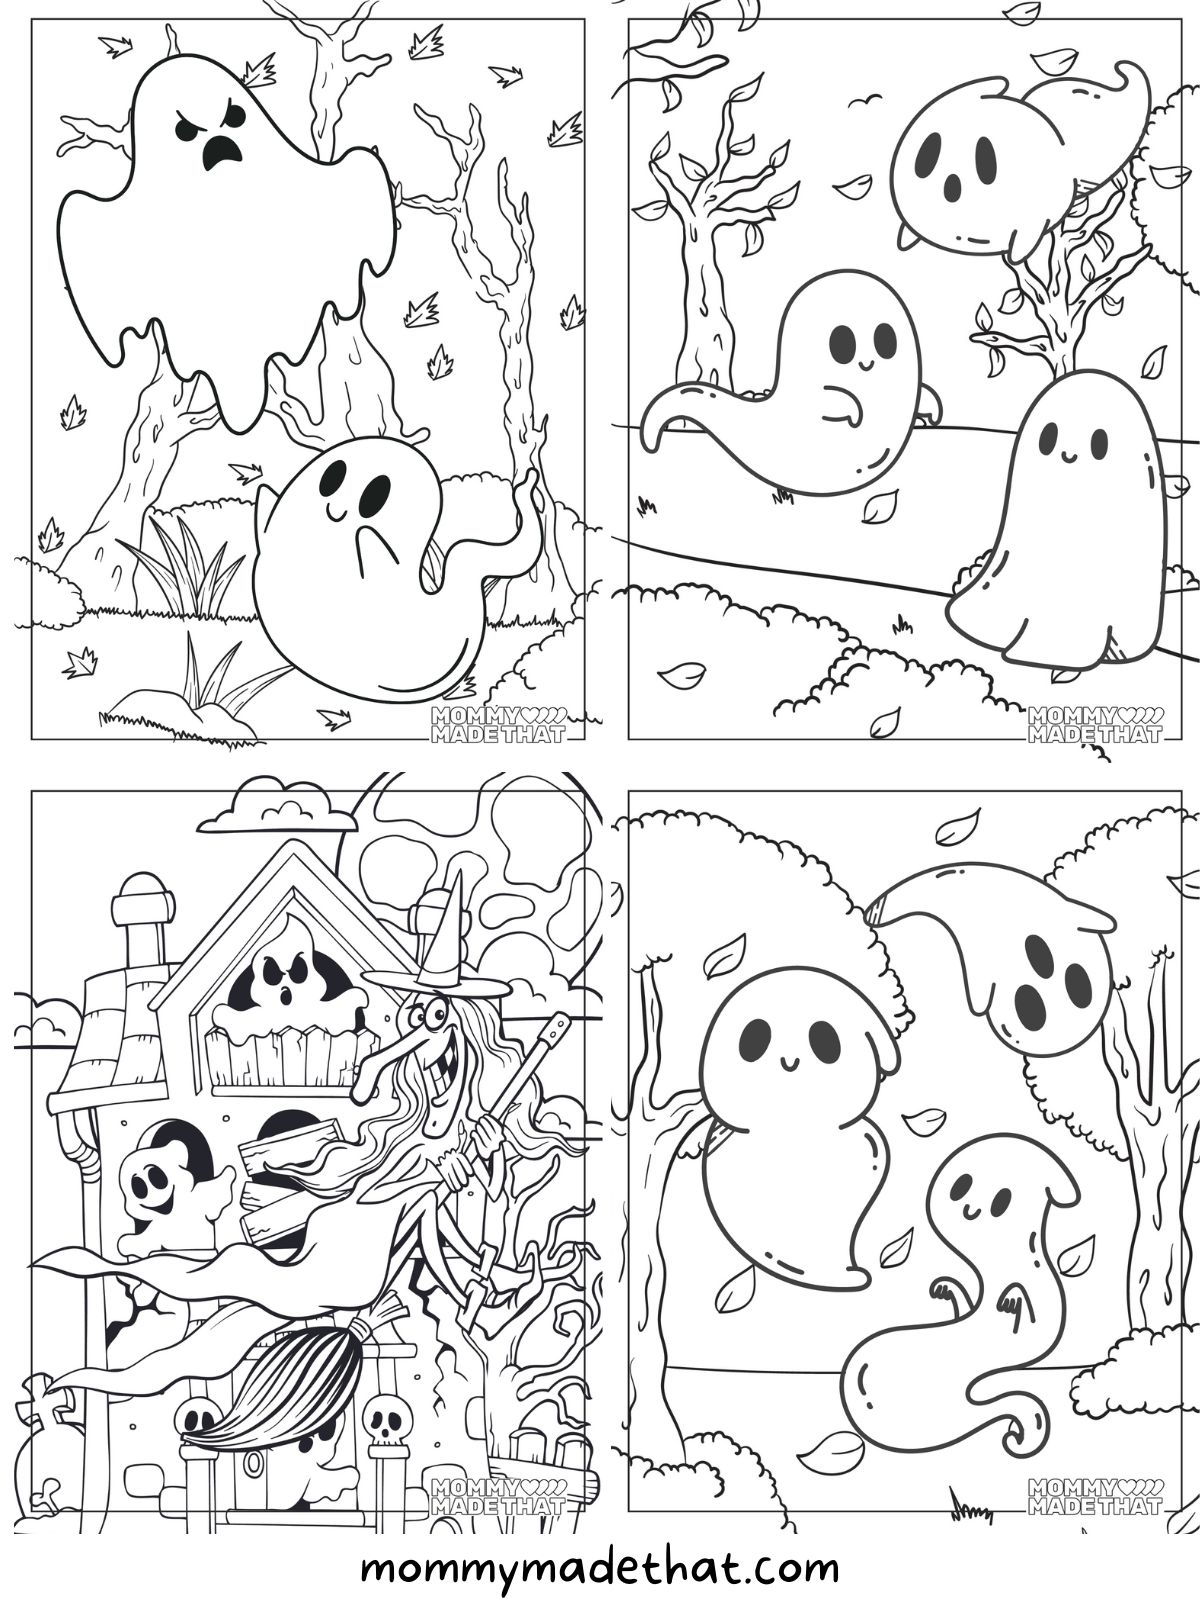 Spooktacular ghost coloring pages lots of free printables